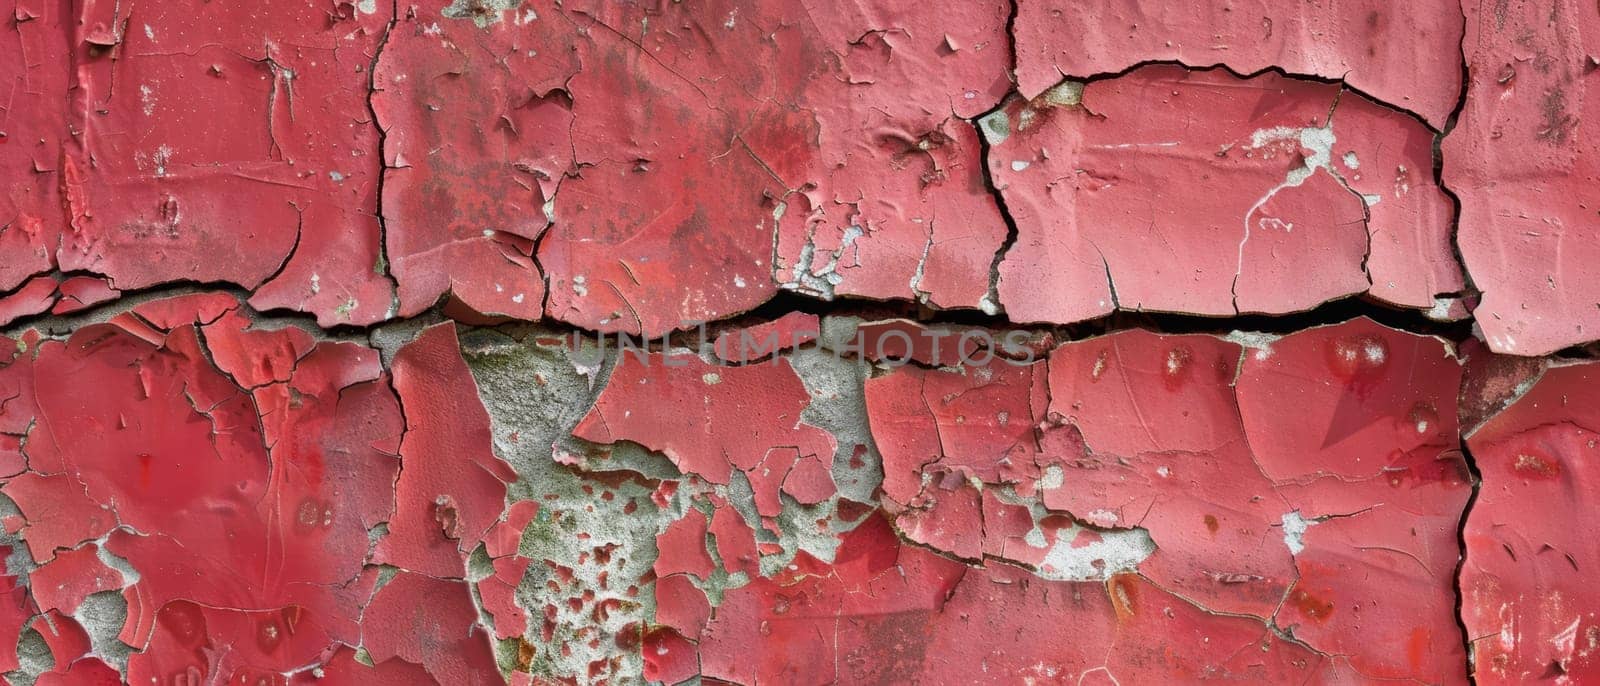 The concrete wall's peeling red paint creates an intriguing texture, a reflection of the urban landscape's ever-changing face. The red tones vary in intensity